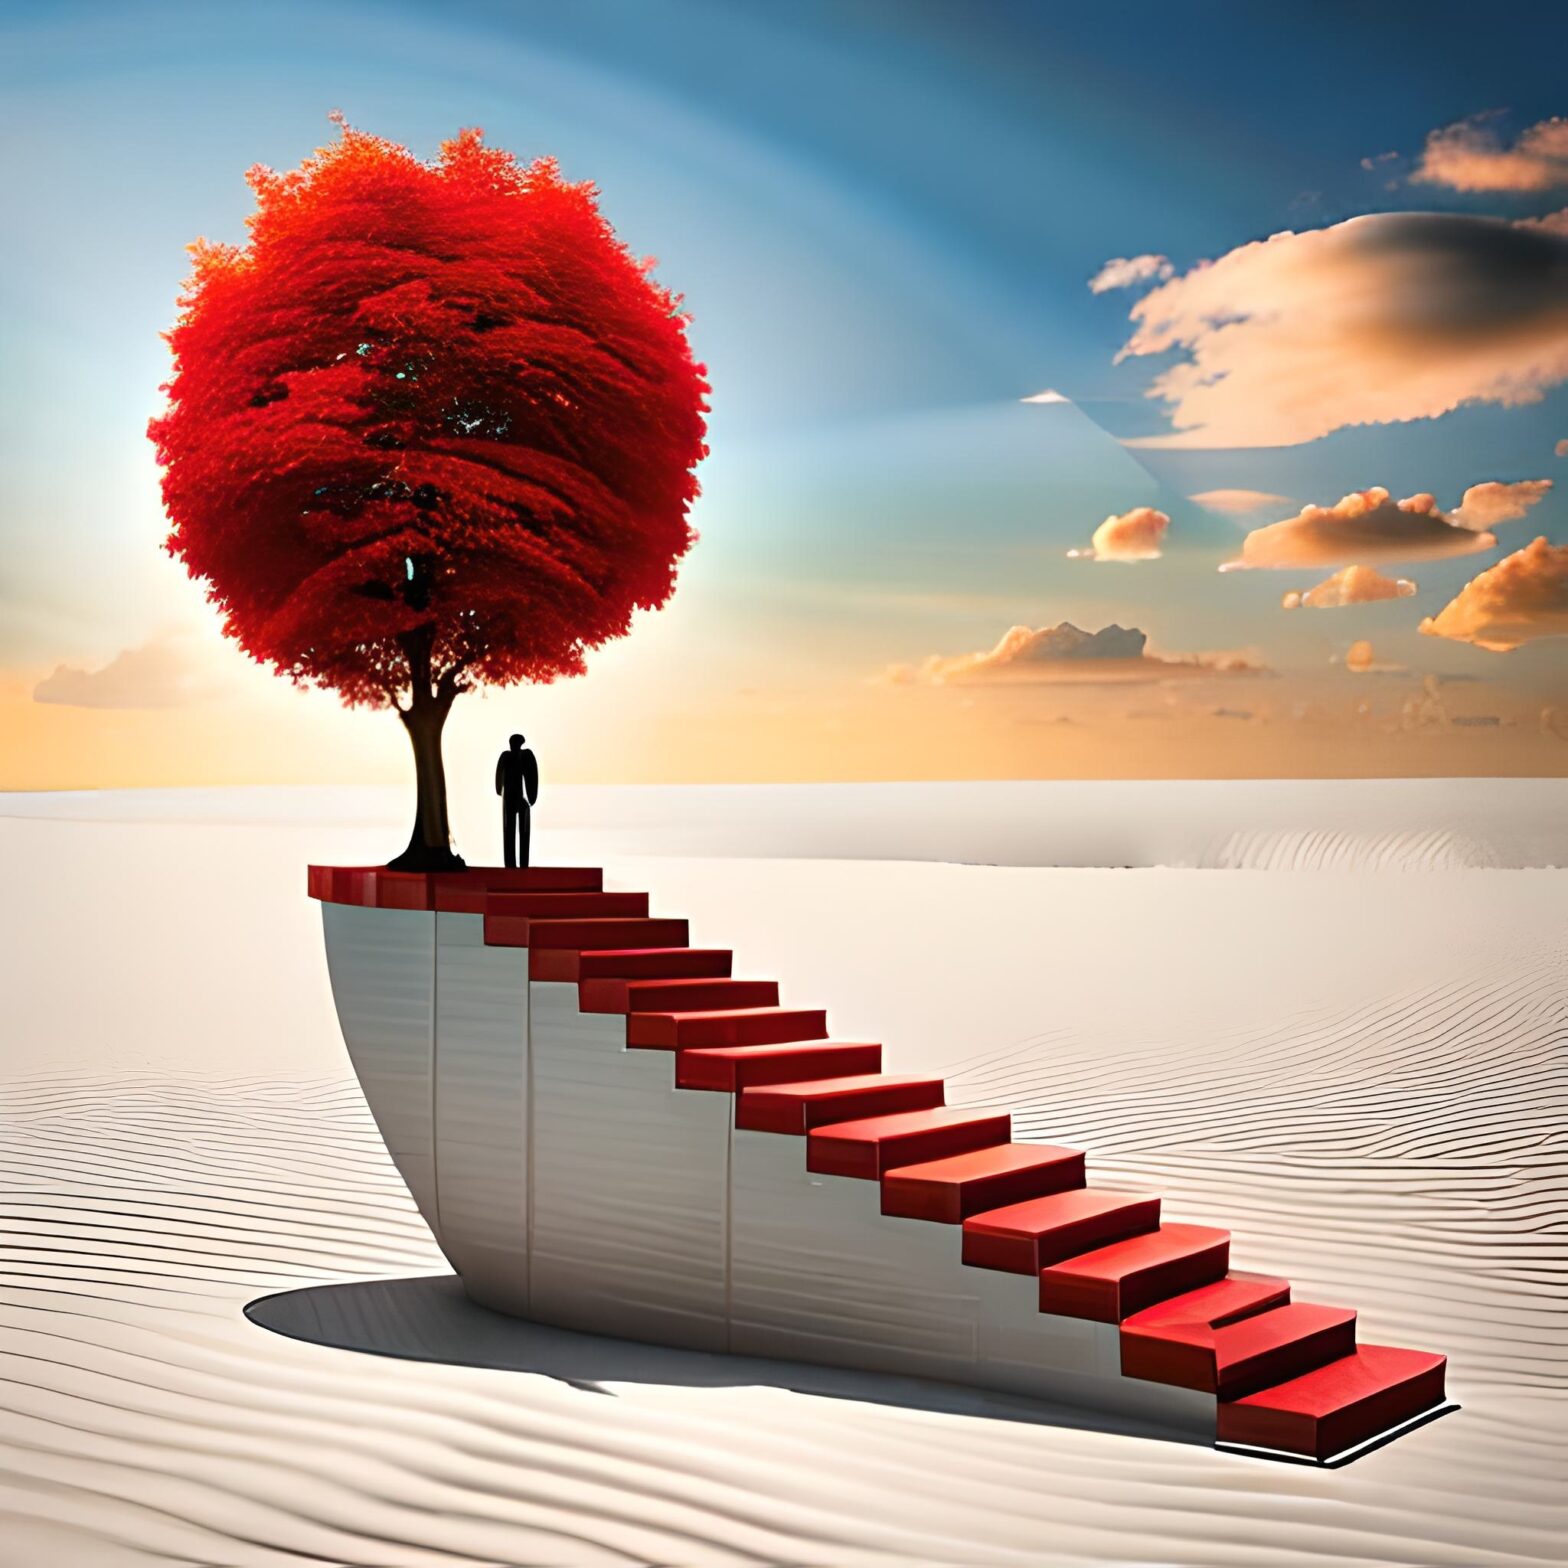 A man on a red stairway with a tree in the background, showcasing the benefits of working with a full-service marketing agency for medium and large businesses.